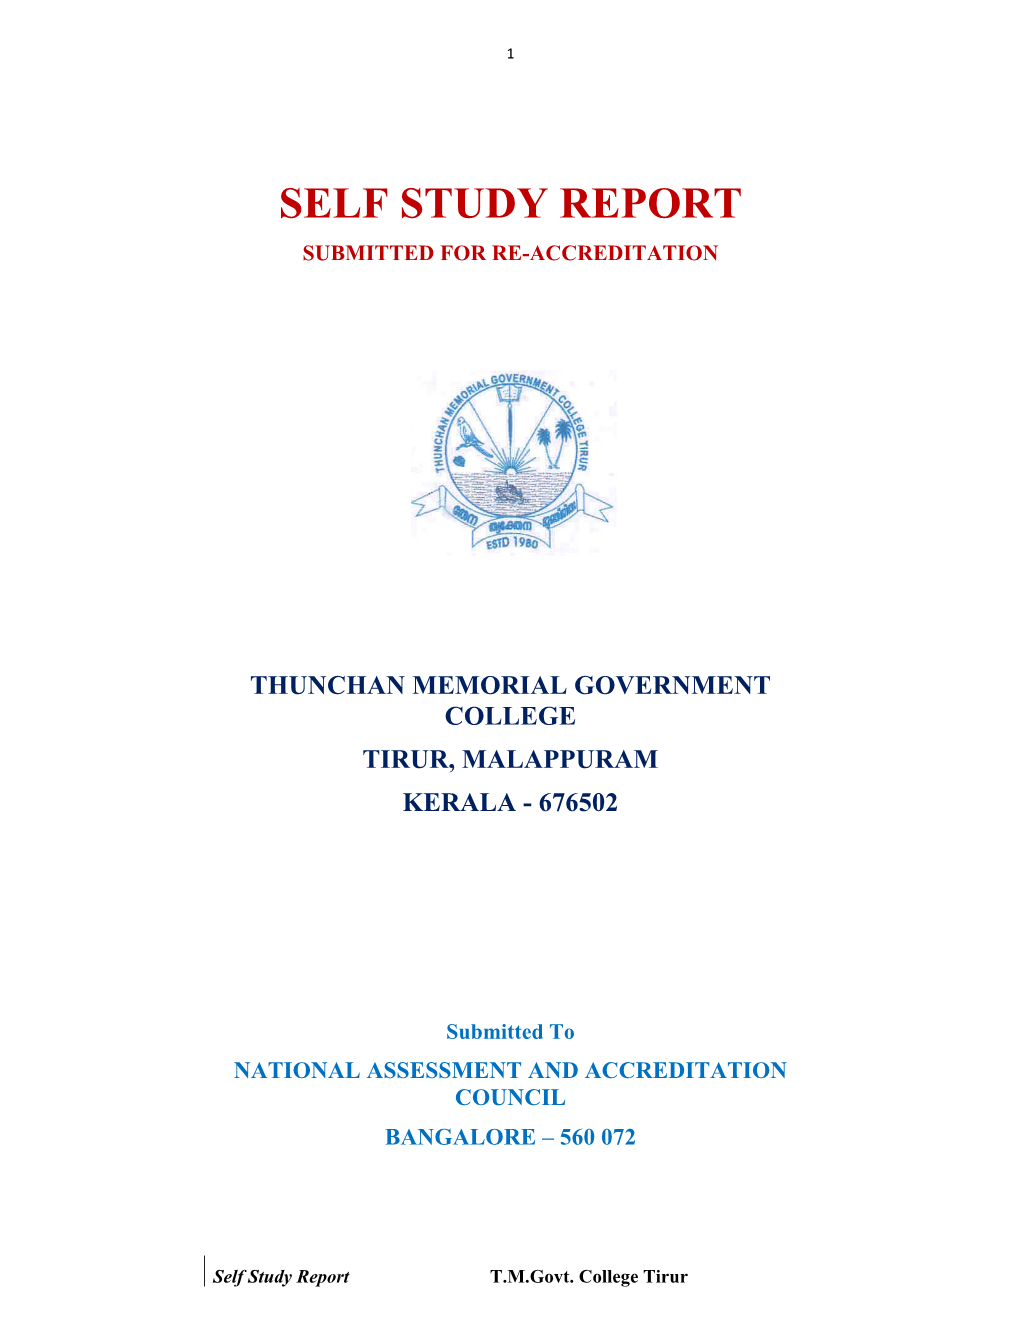 Self Study Report Submitted for Re-Accreditation